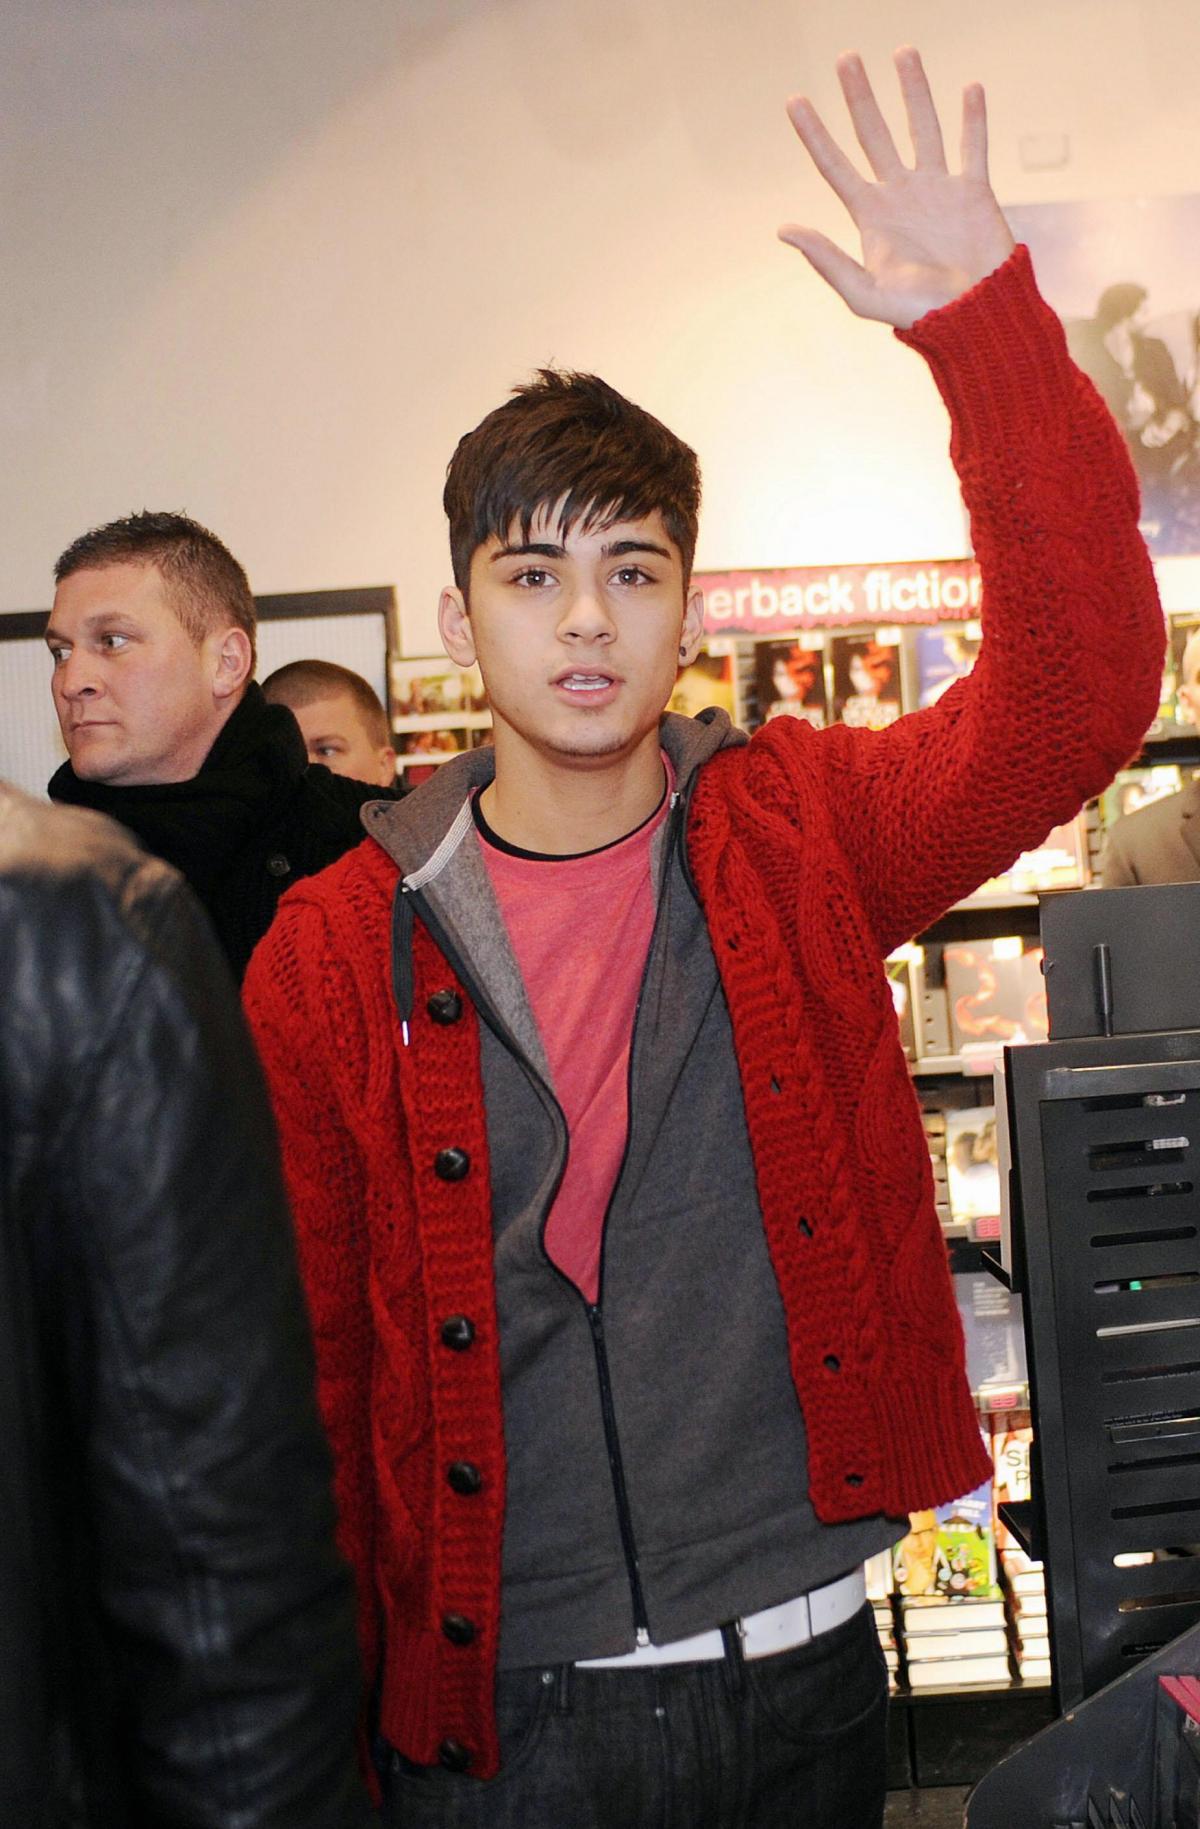 Zayn arrives for an autograph signing session at the HMV store, Bradford, in 2010